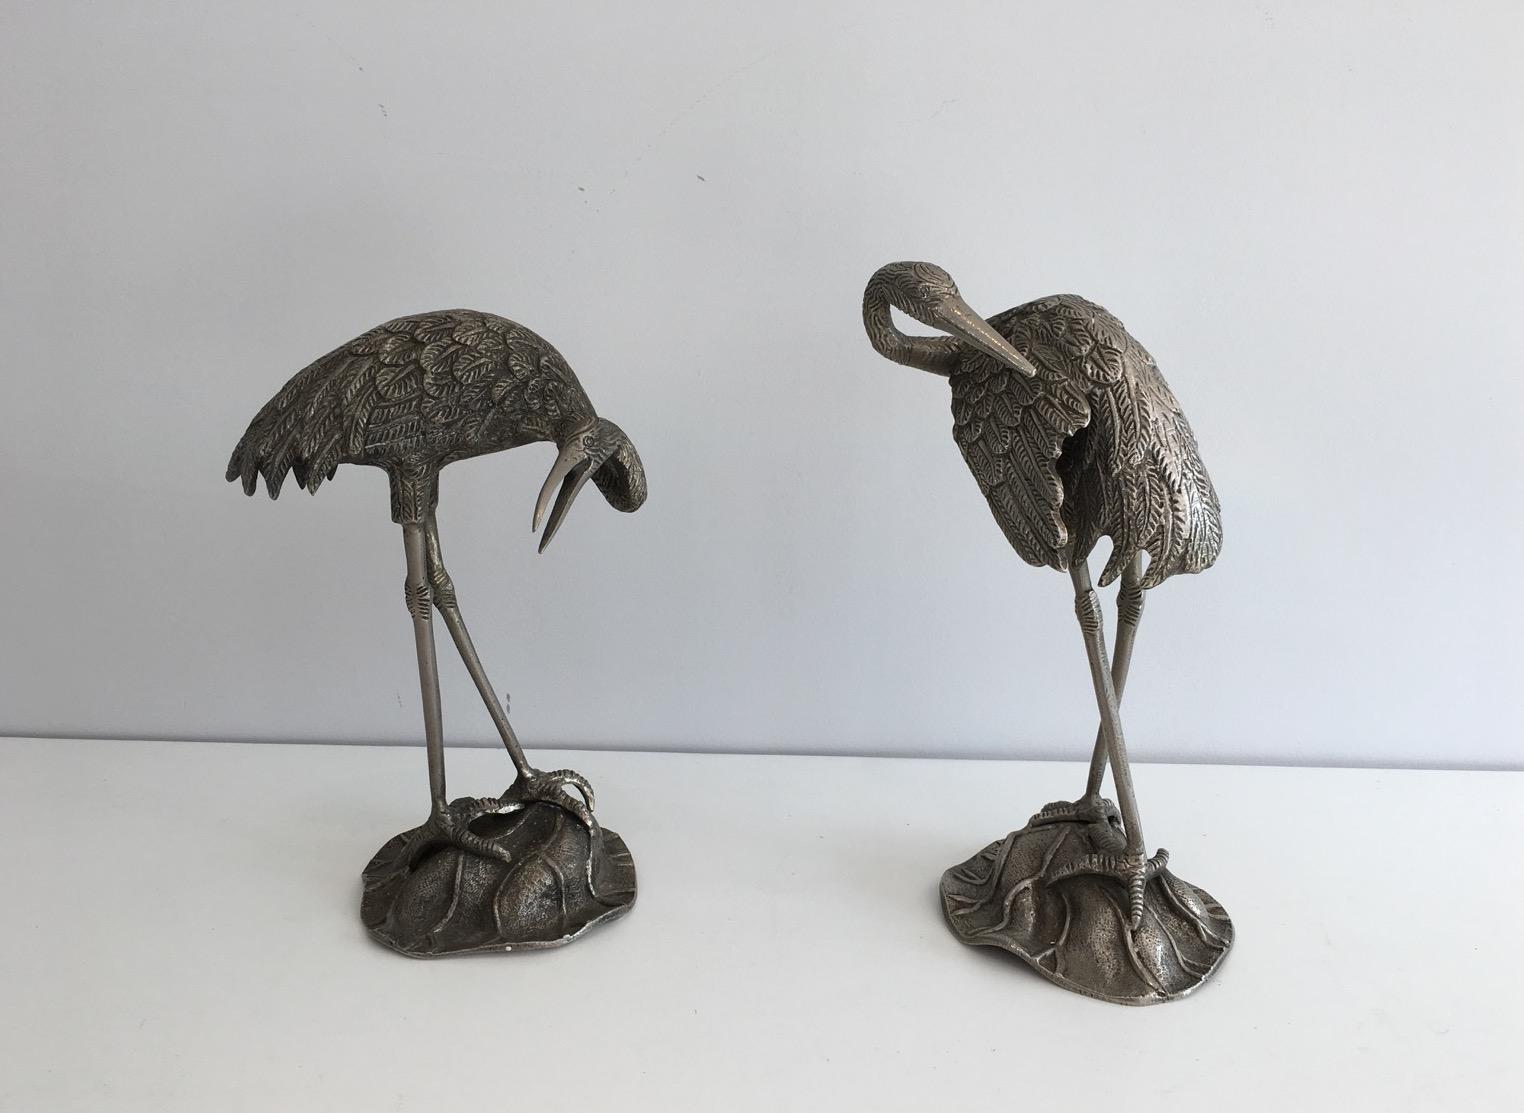 This nice and decorative pair of herons is made of silvered bronze. This is a French work, in the style of the famous Maison Bagués, circa 1940.